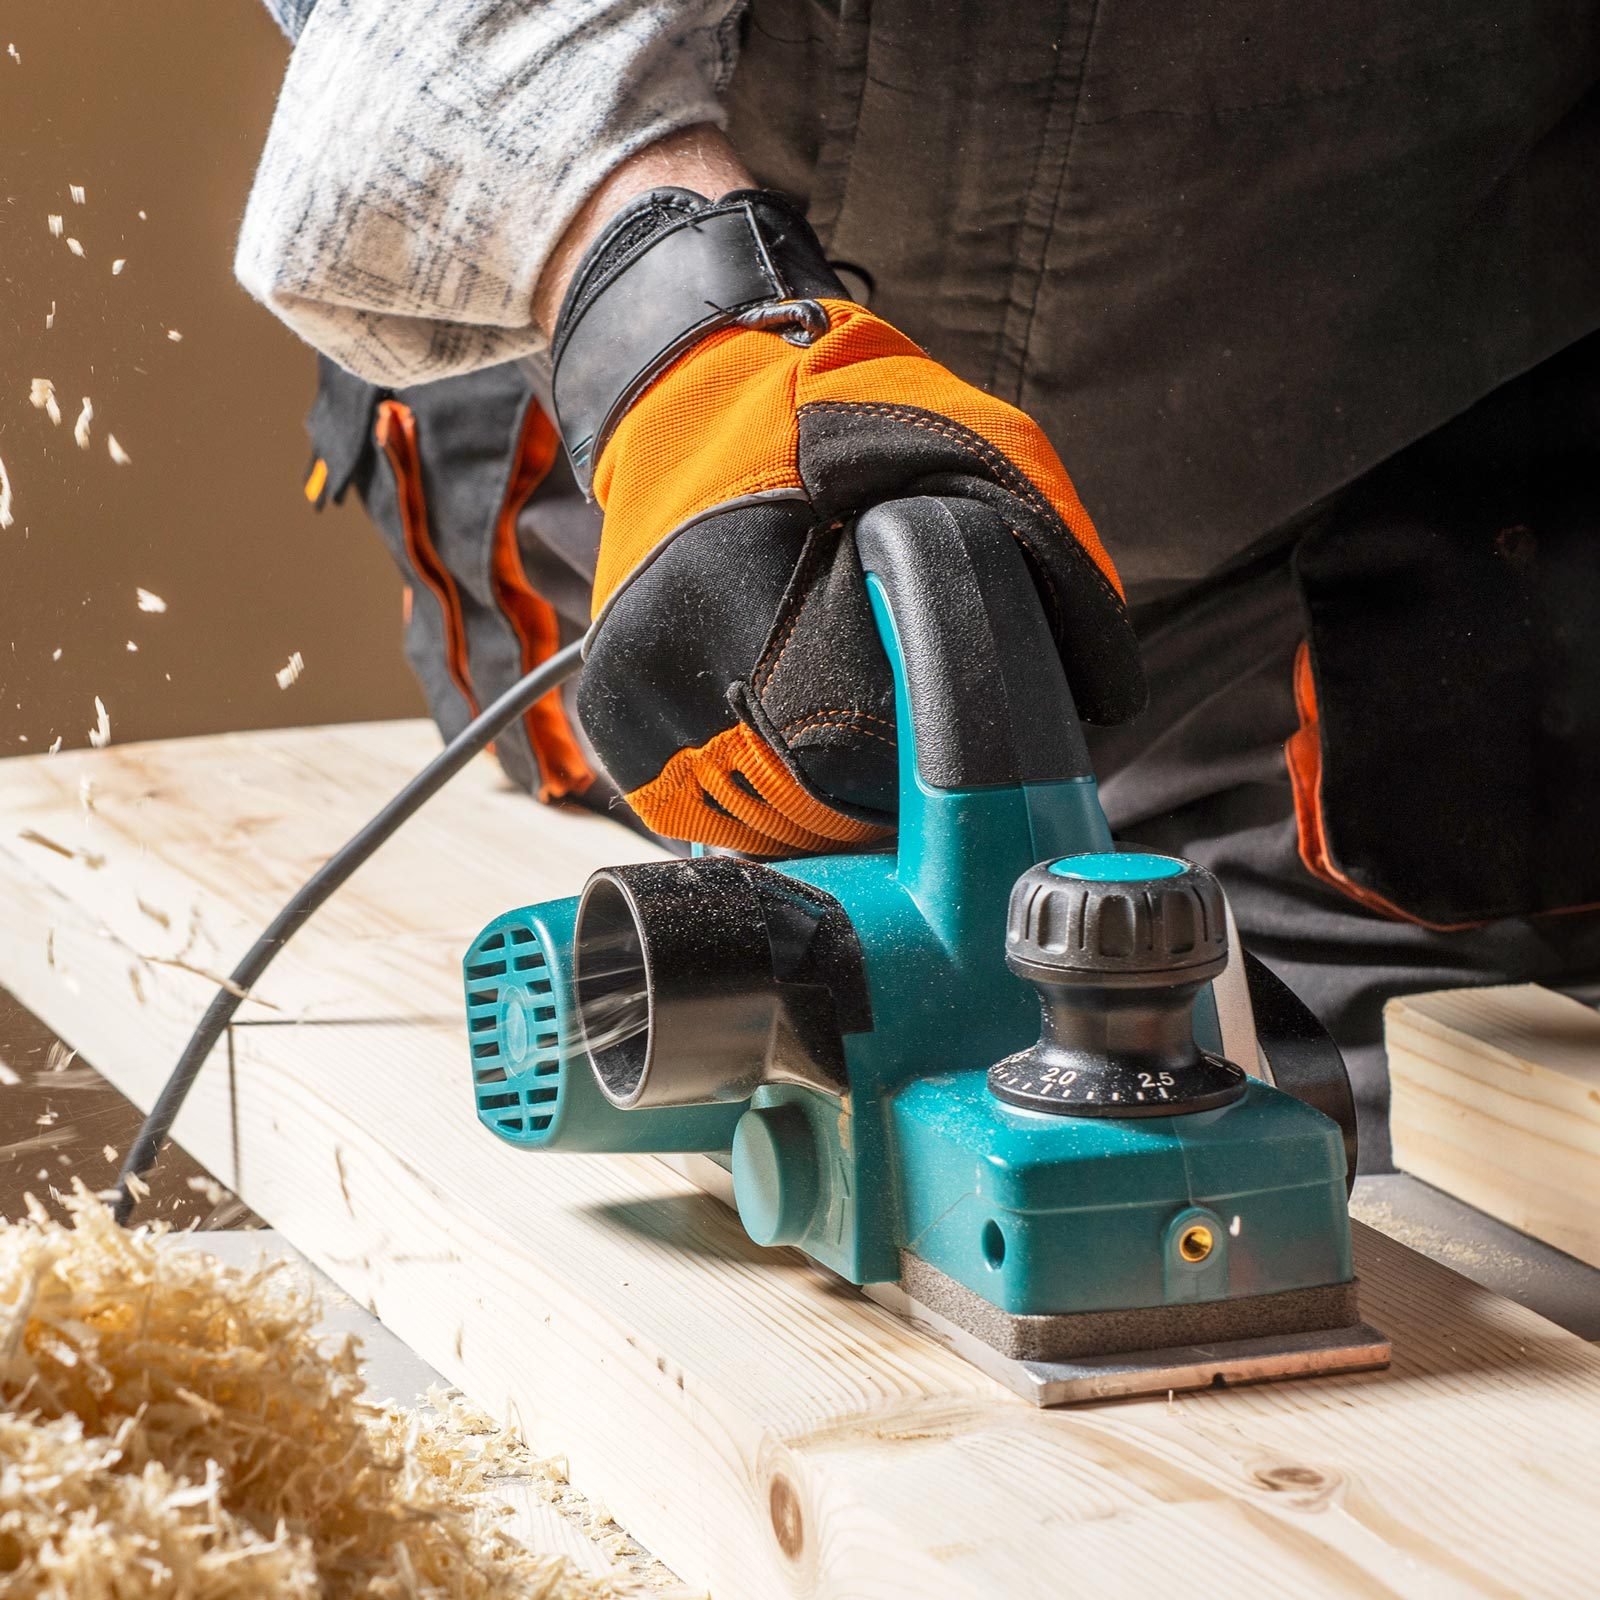 How To Use an Electric Planer